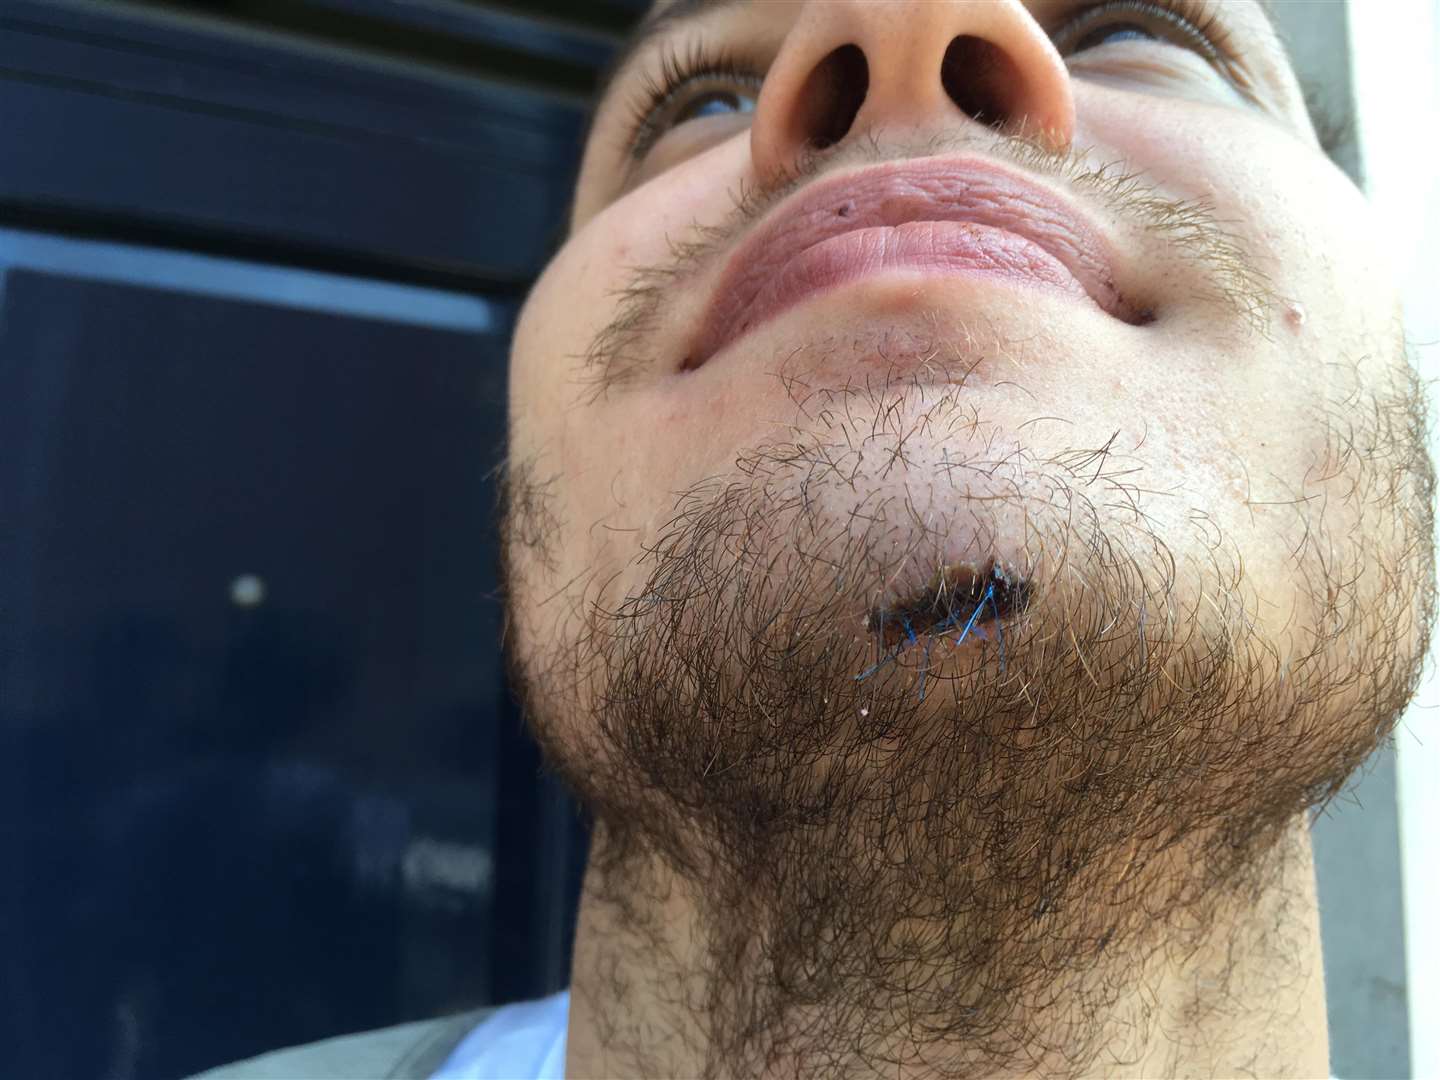 His chin was bleeding profusely after the group attacked him